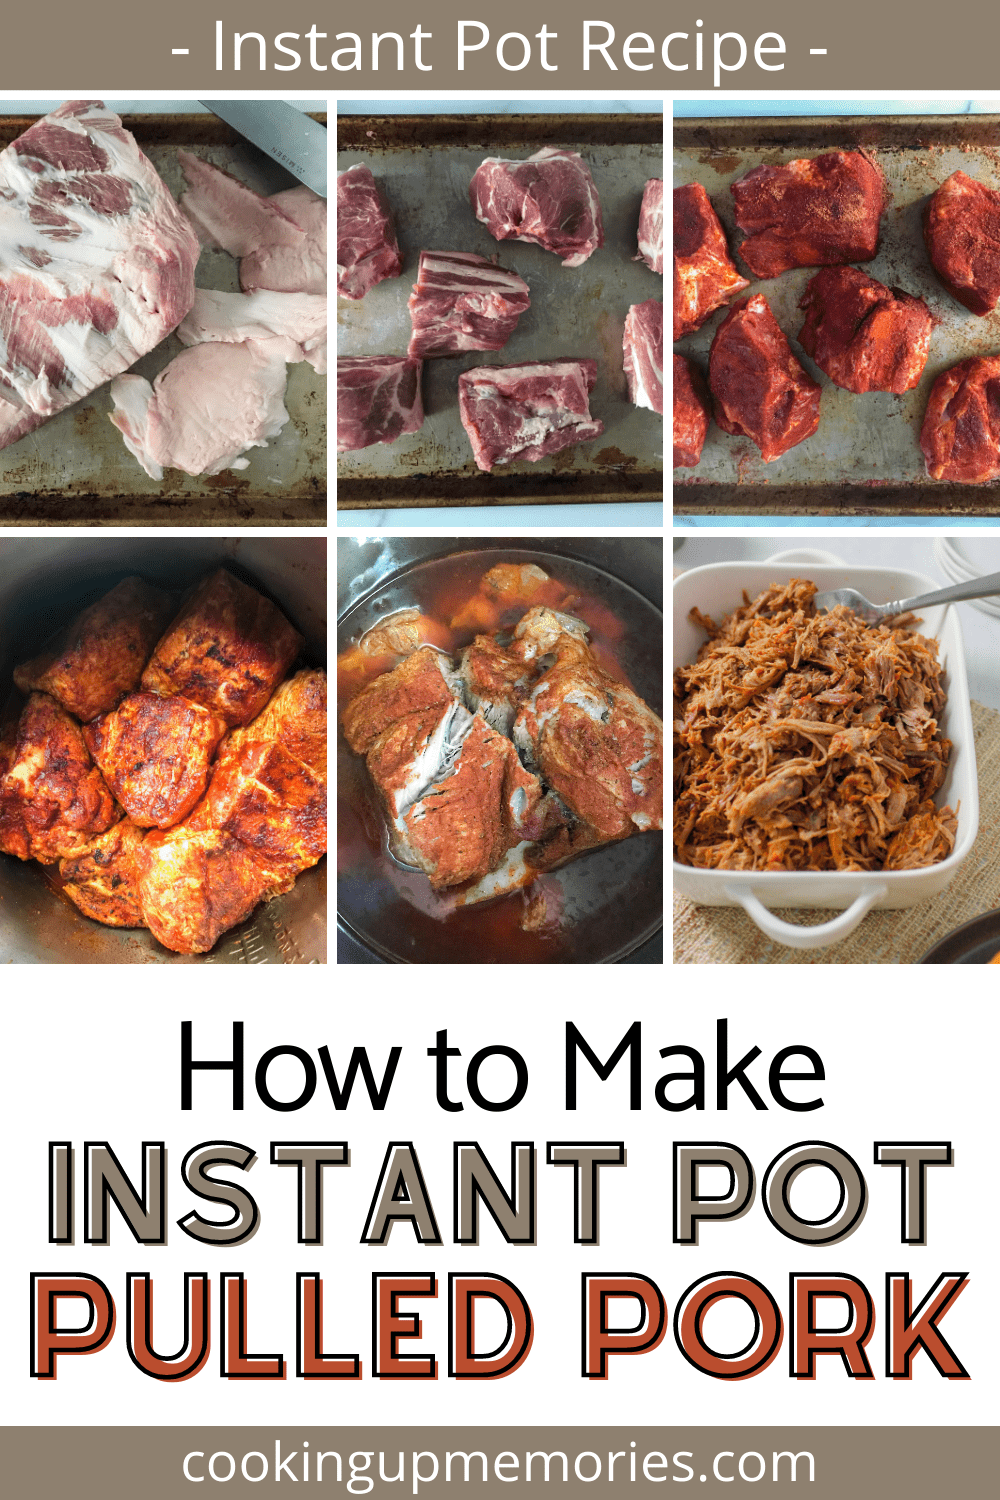 Six pictures for a how to make instant pot pulled pork guide.